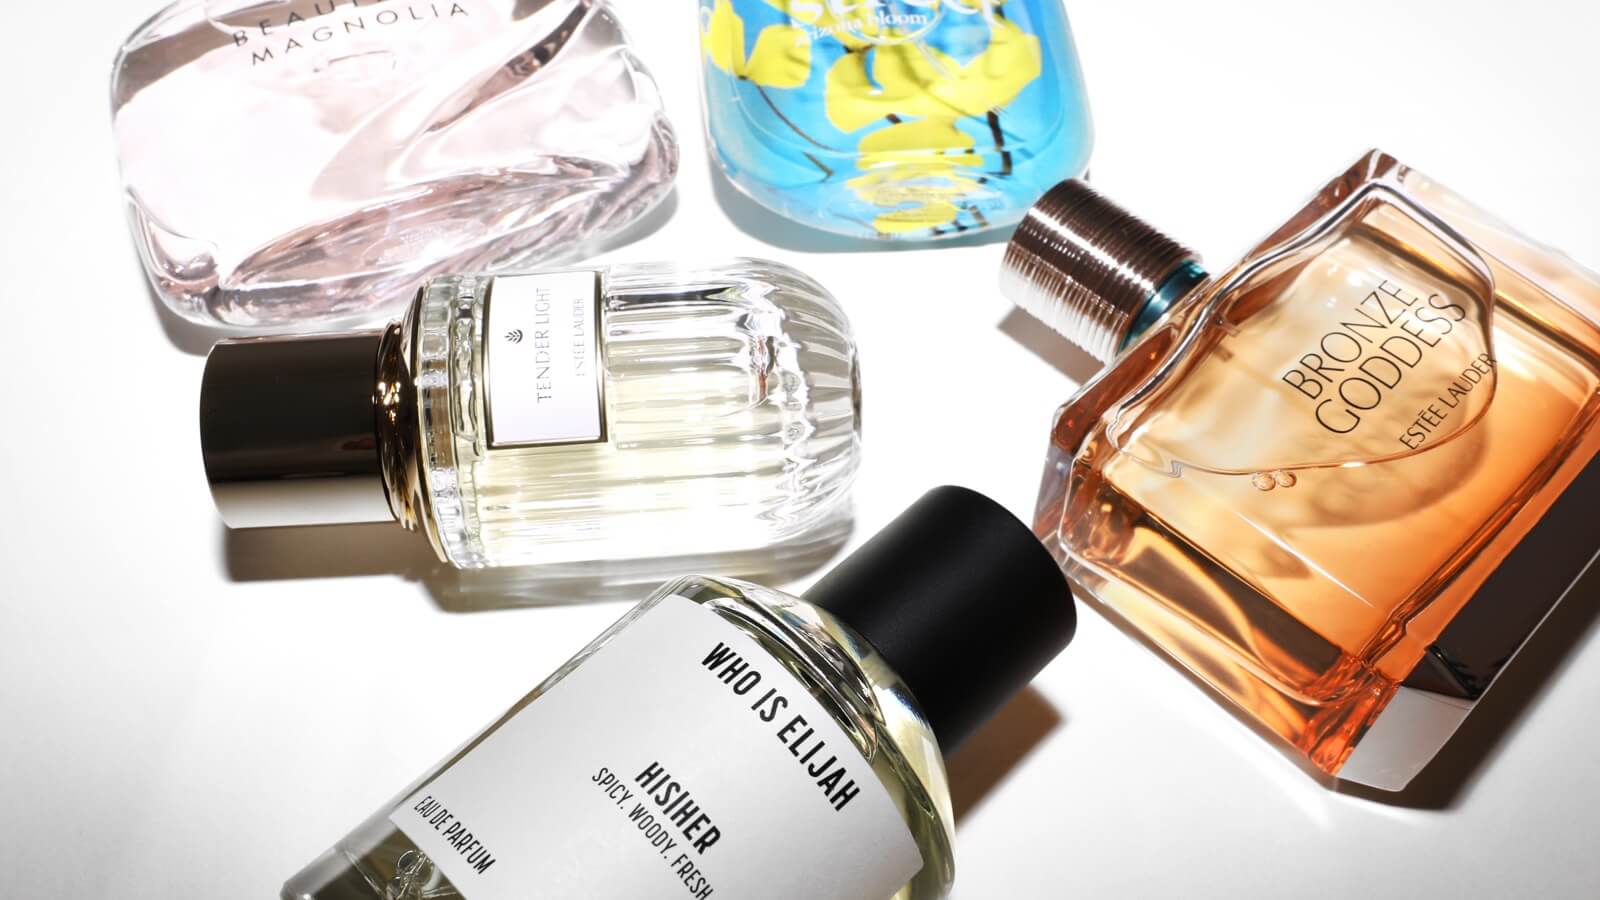 6 Best Vanilla Based Perfumes To Ensure You're Smelling Sweet All Day Long